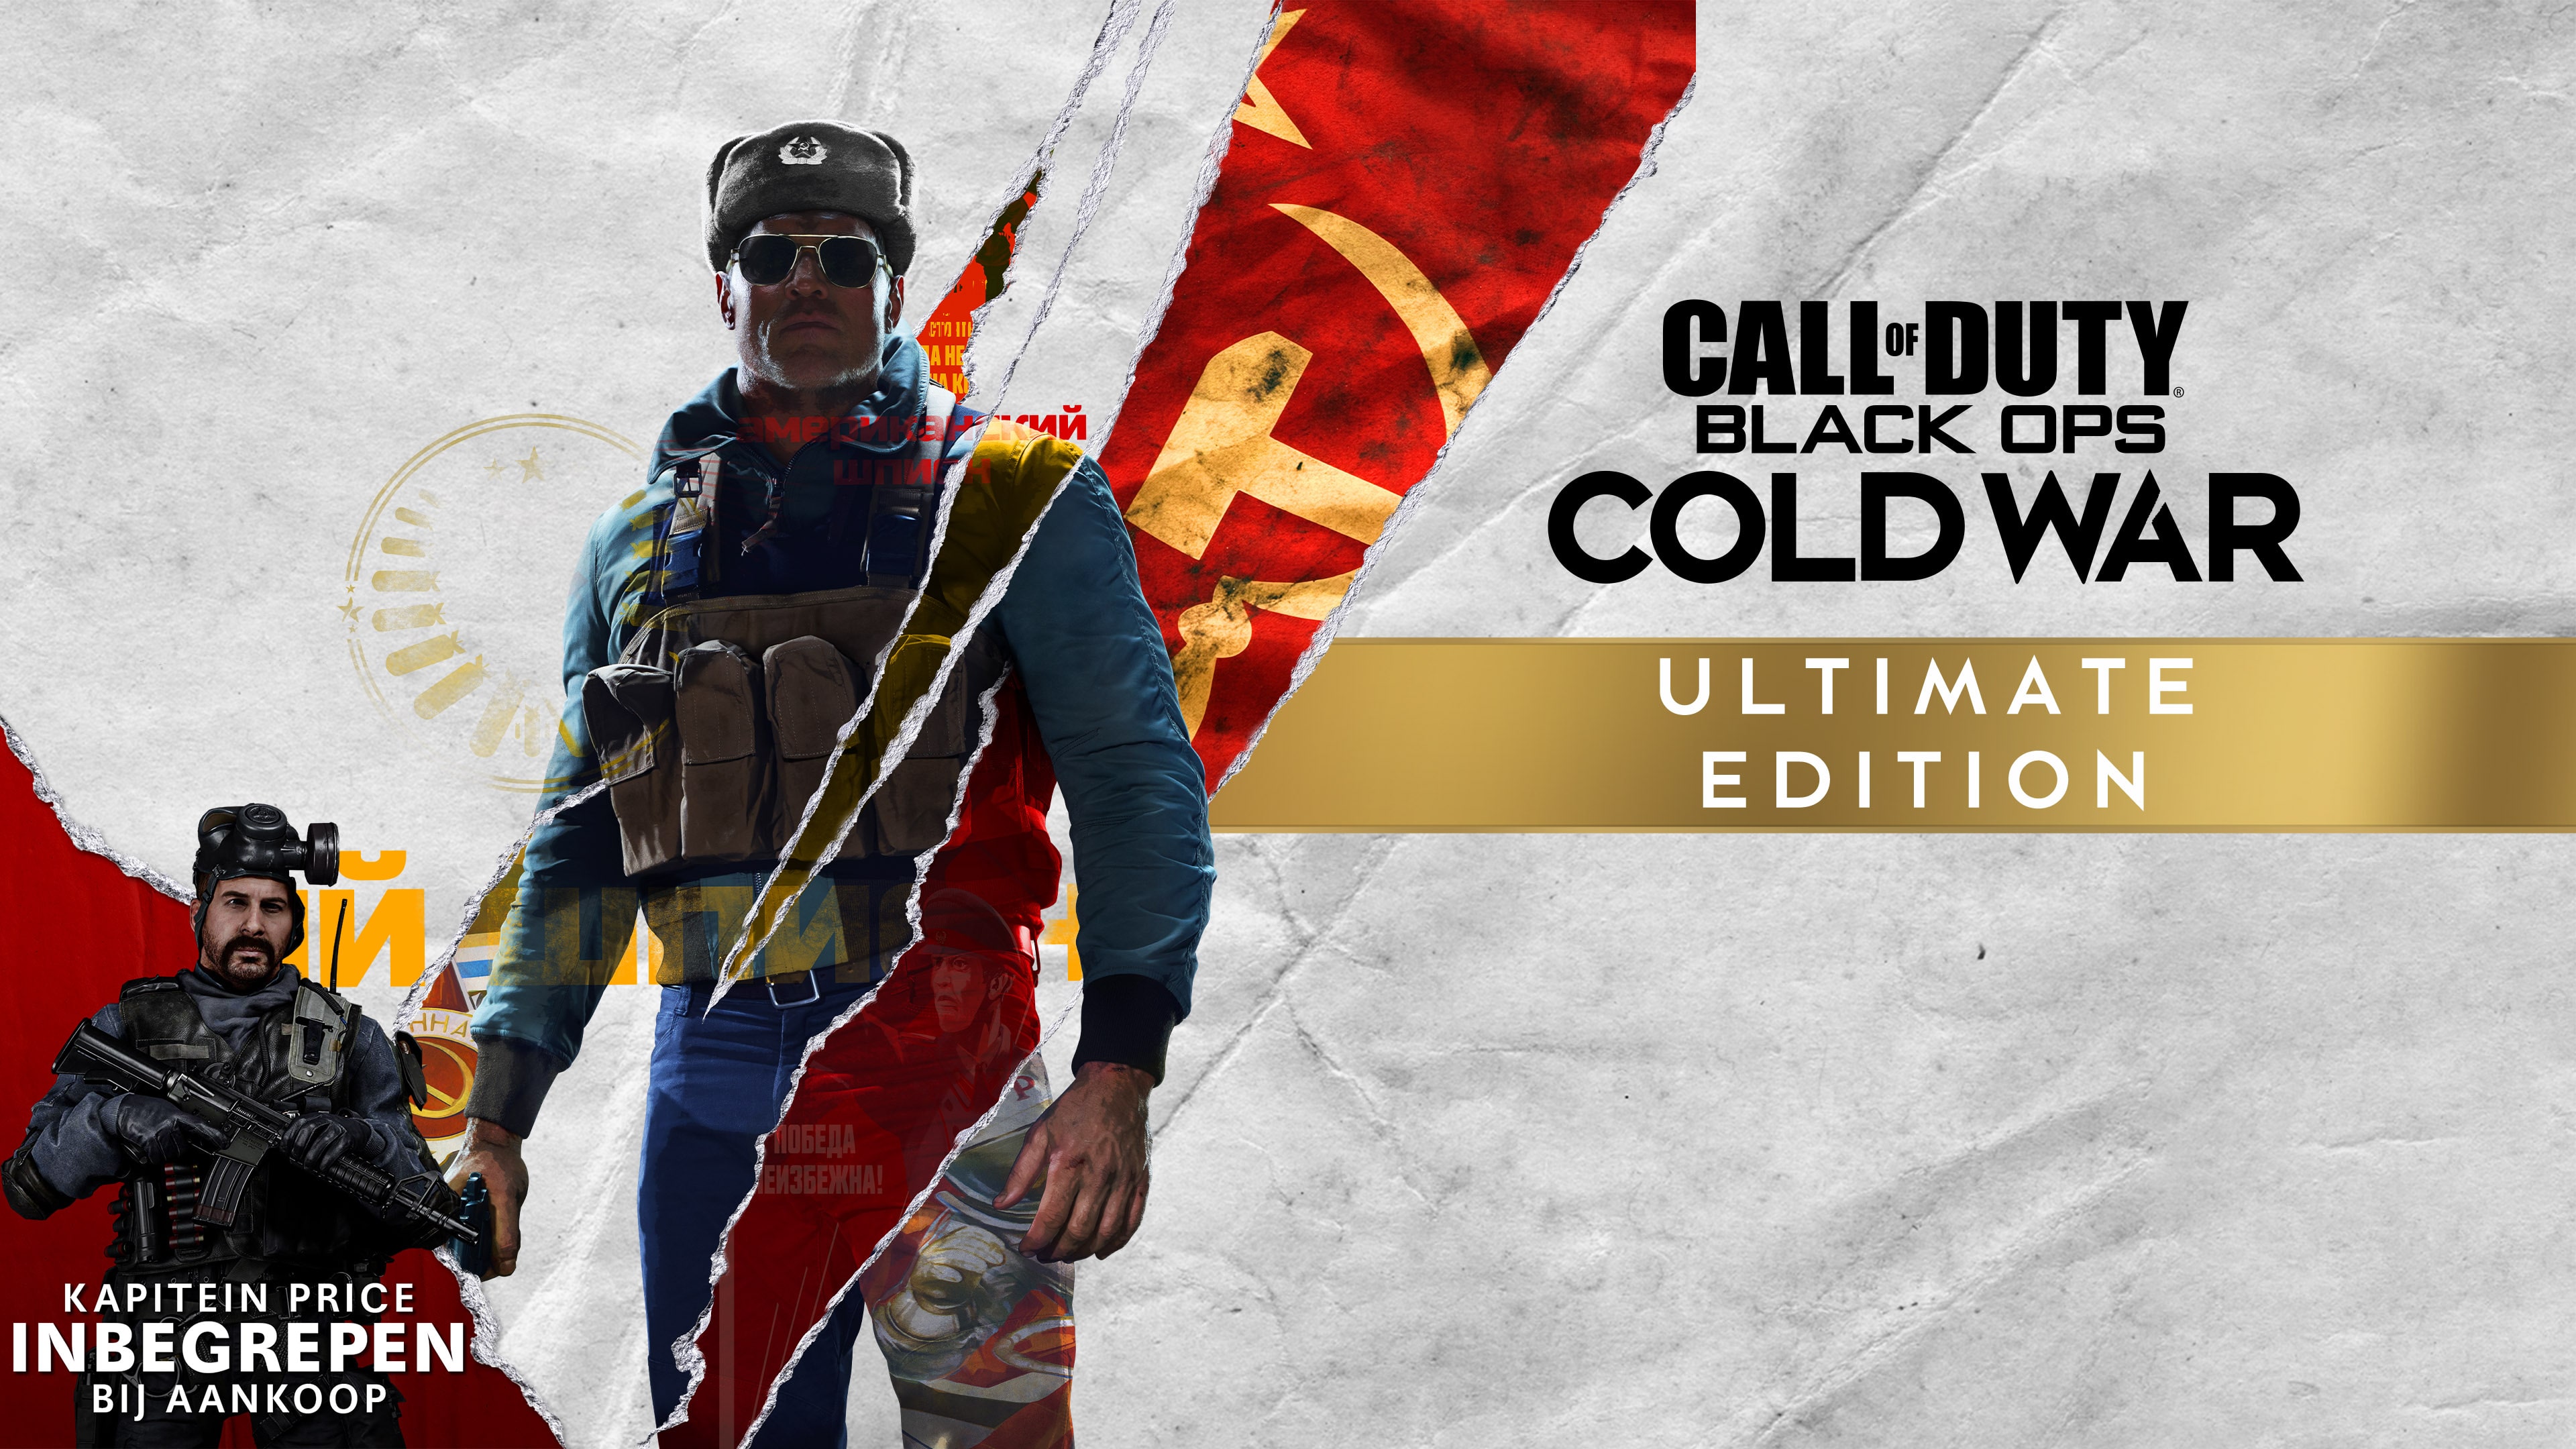 call of duty cold war ultimate edition what does it include